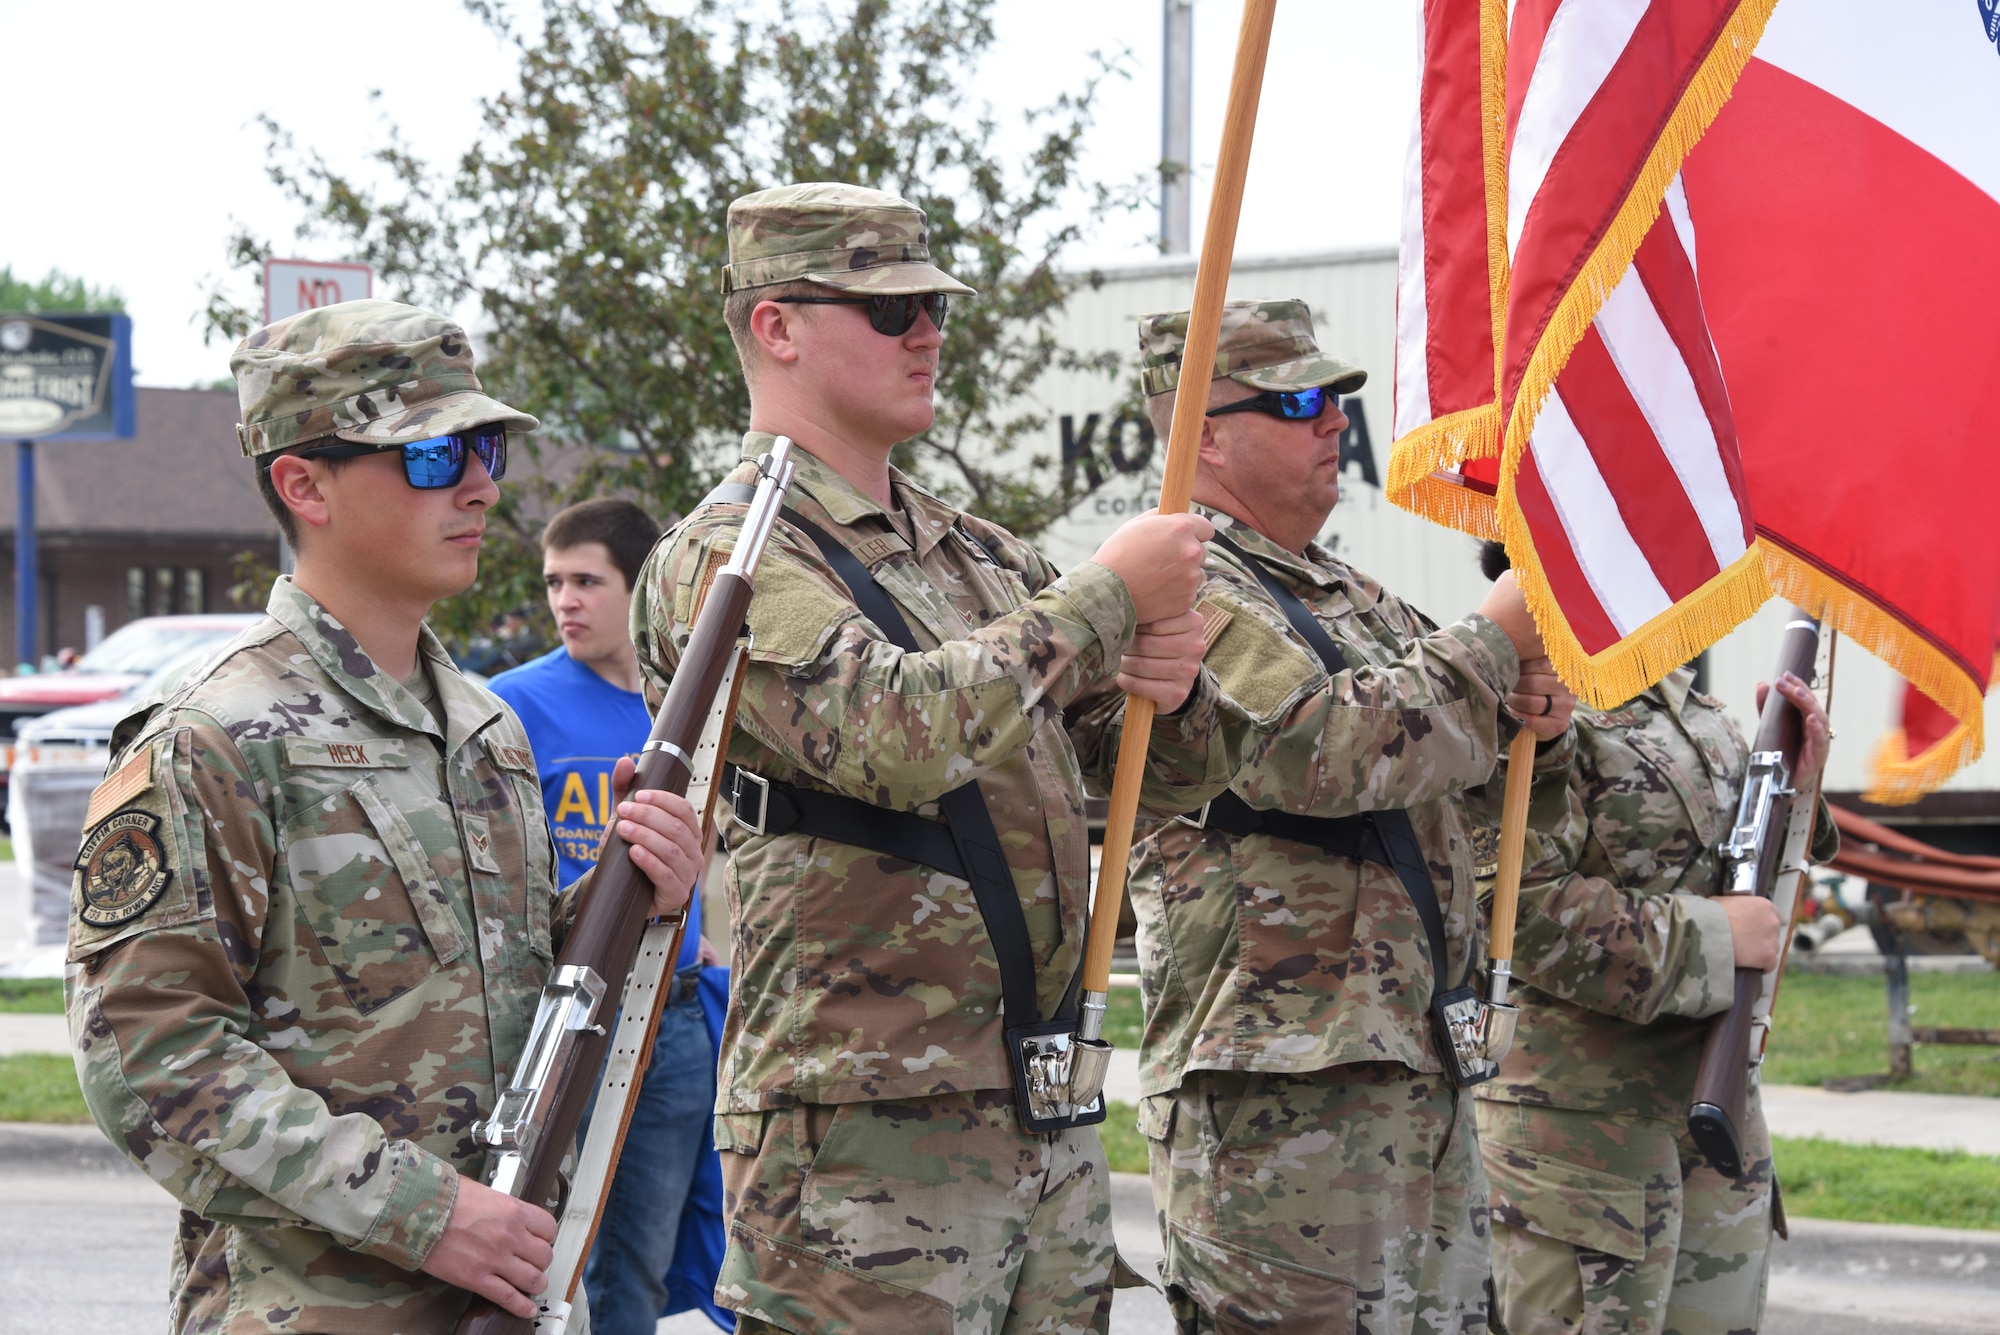 Airmen hold flags and ceremonial rifles.